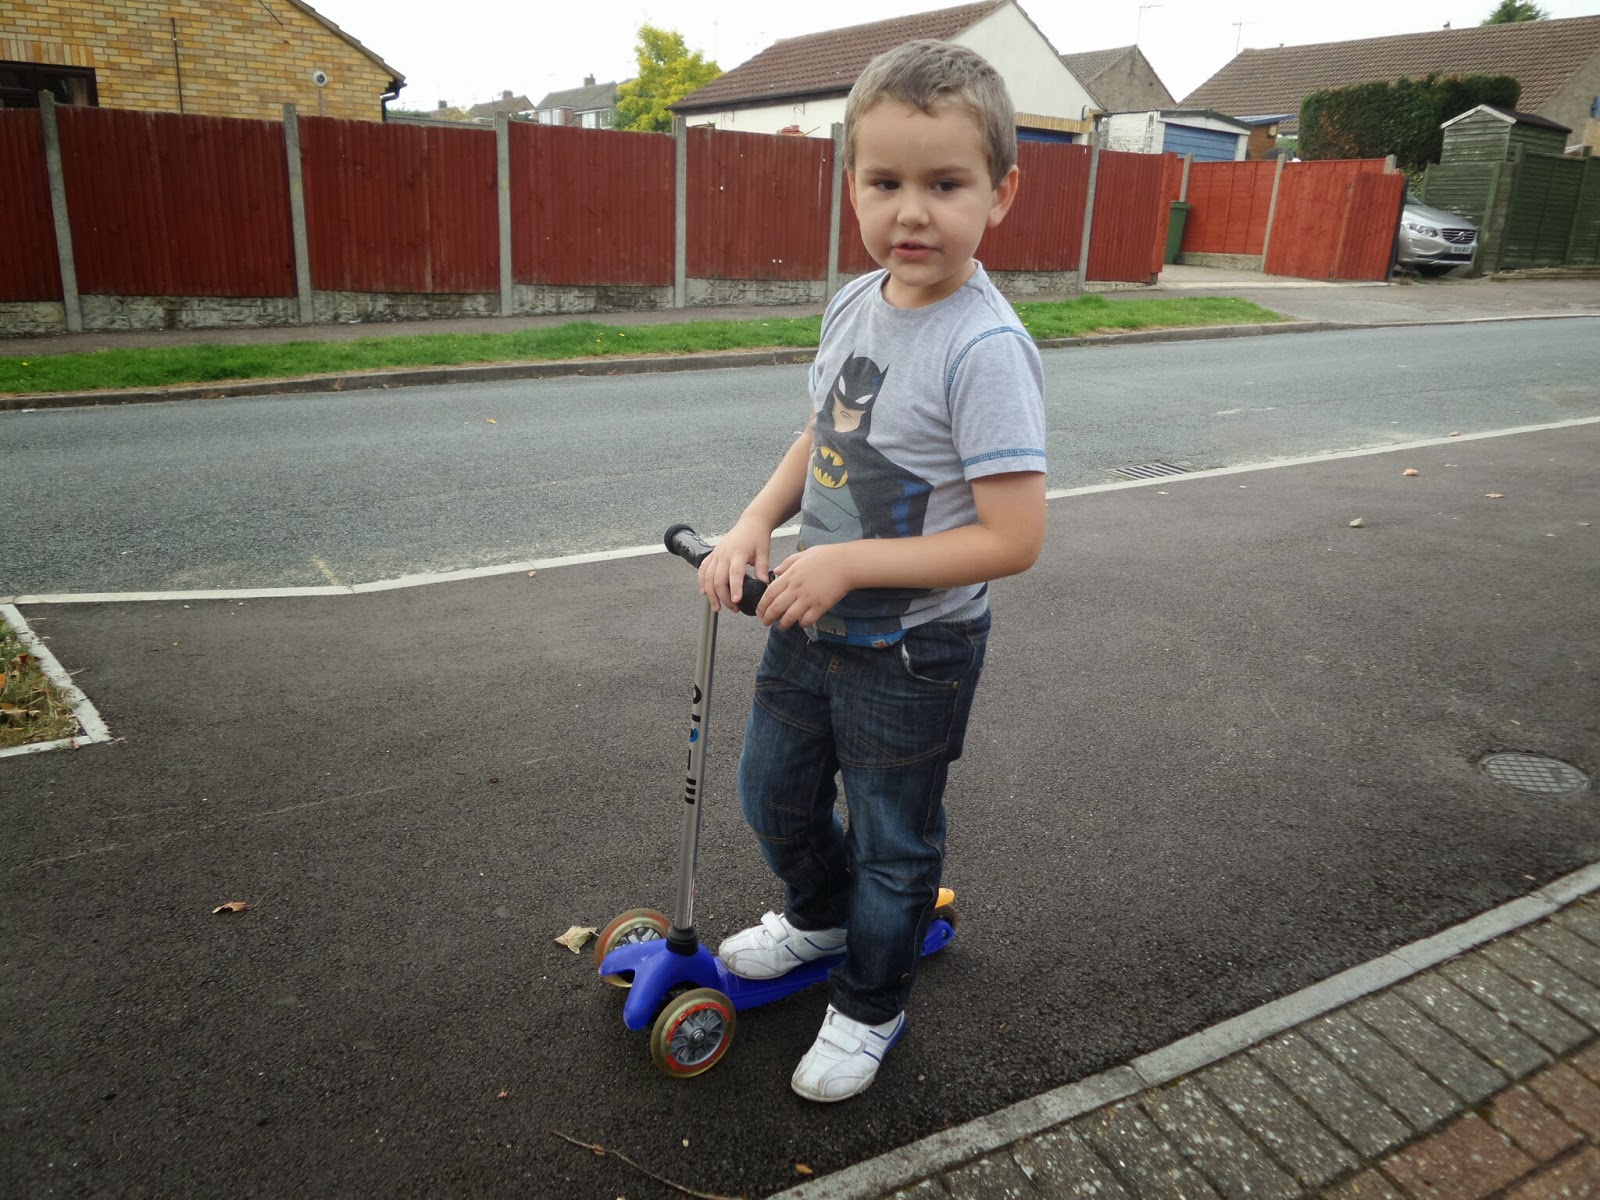 BB on his Scooter